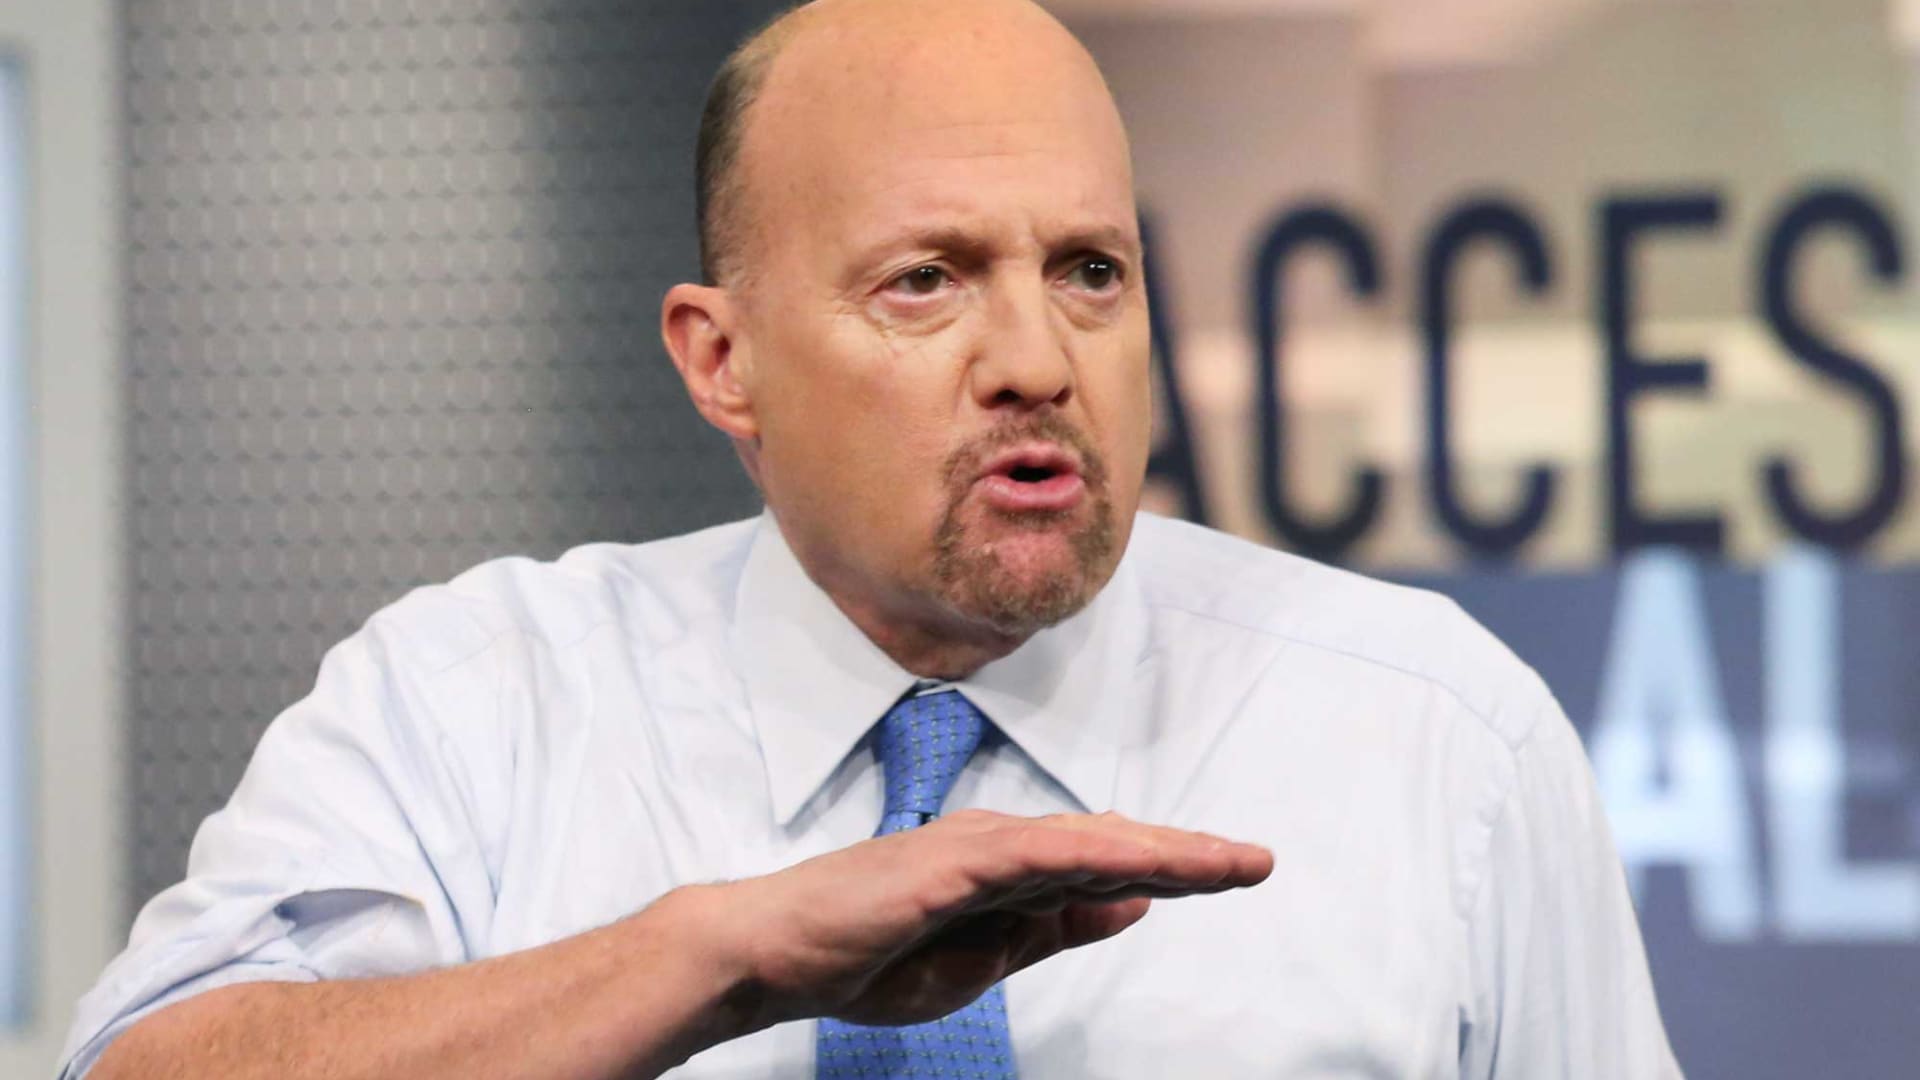 Jim Cramer says the economy could be cooling enough for the Fed to dial back its inflation battle - CNBC